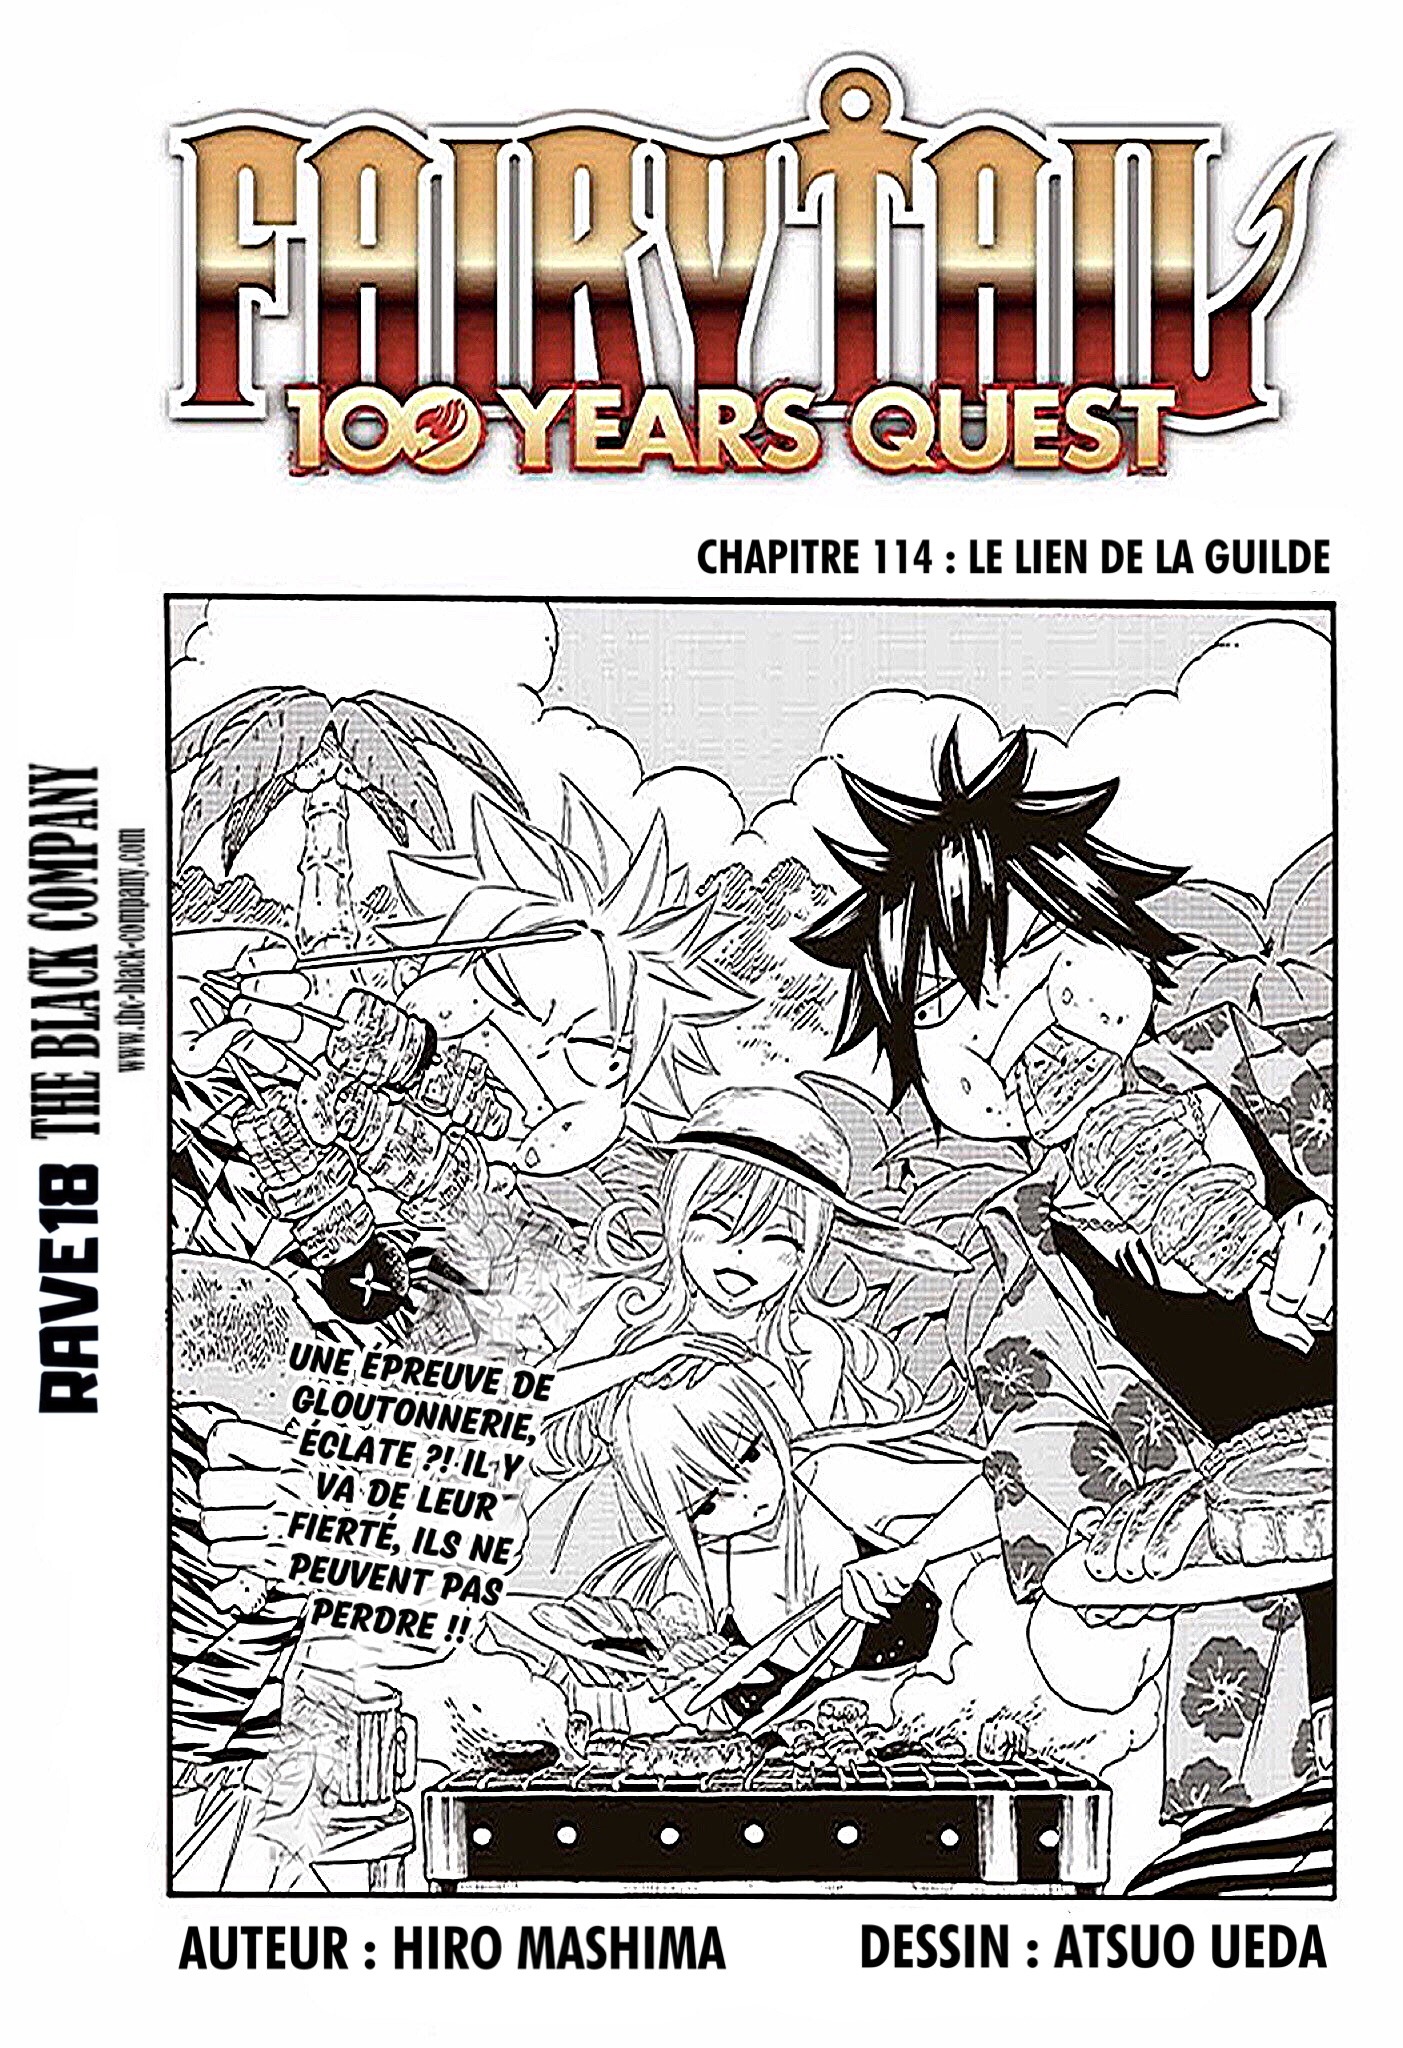 Fairy Tail 100 Years Quest: Chapter chapitre-114 - Page 1